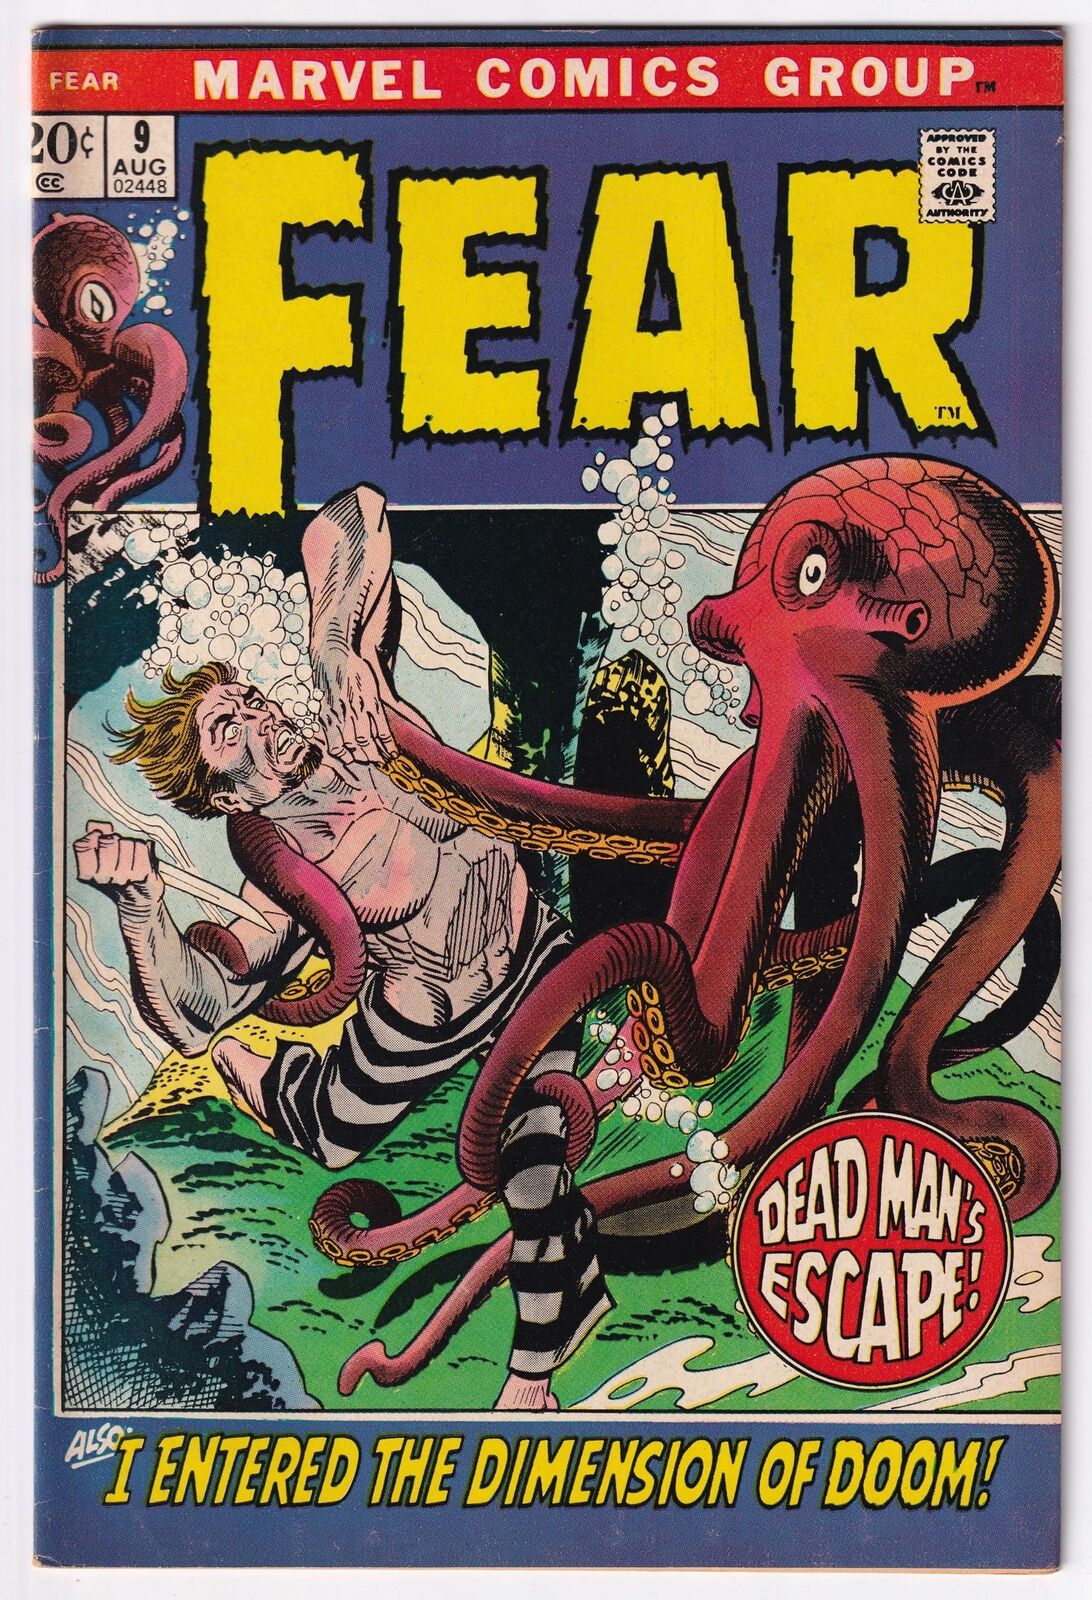 Marvel Fear #9 Comic Book 1972 Jack Kirby I Entered the Dimension of Doom Escape